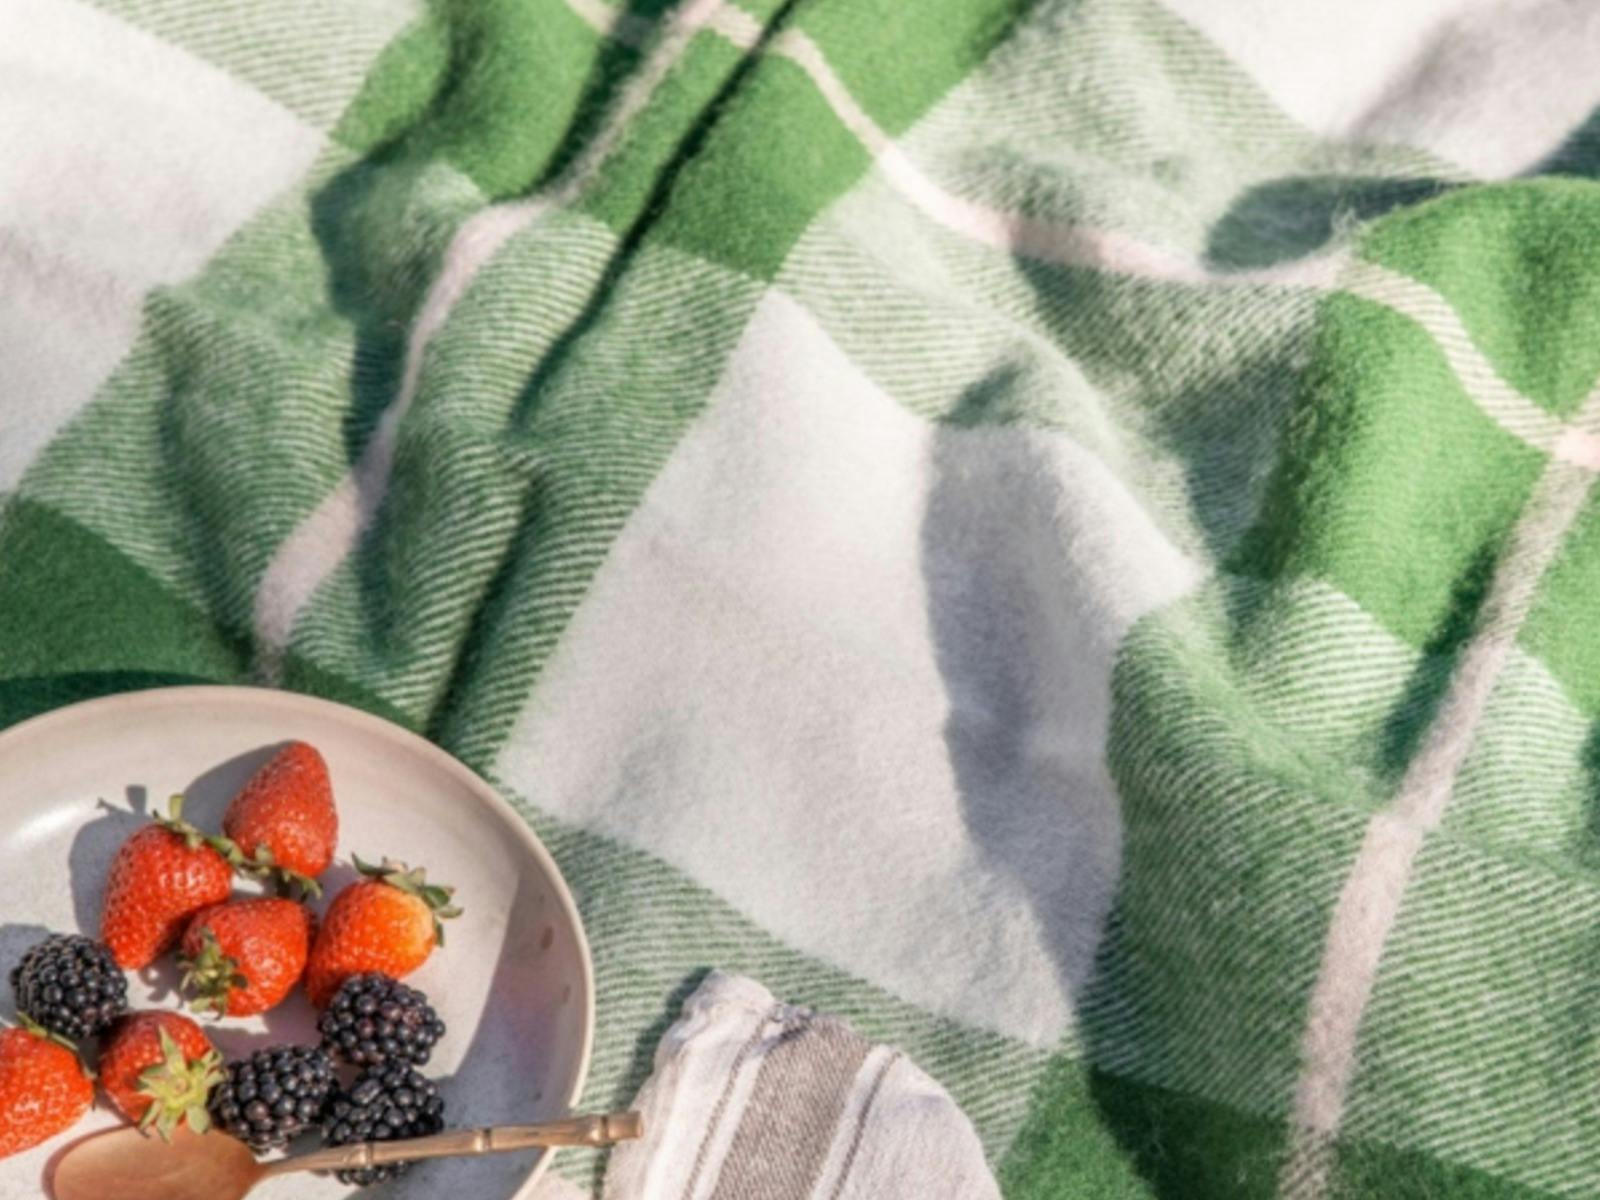 Bright green and white checked picnic blanket with bowl of berries and spoon